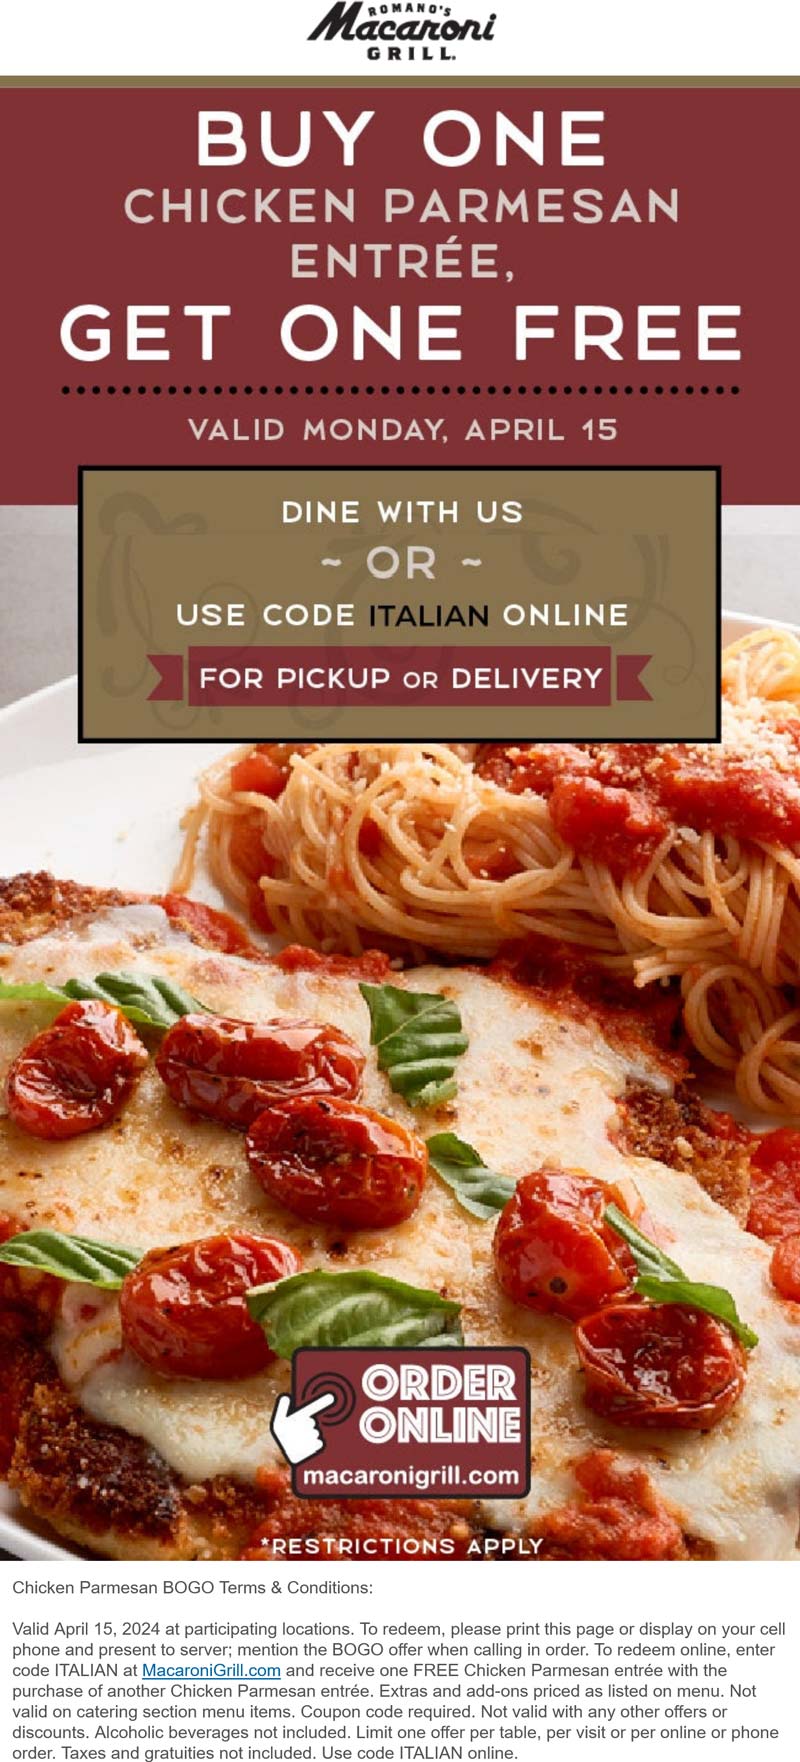 Macaroni Grill restaurants Coupon  Second chicken parmesan entree free today at Macaroni Grill #macaronigrill 